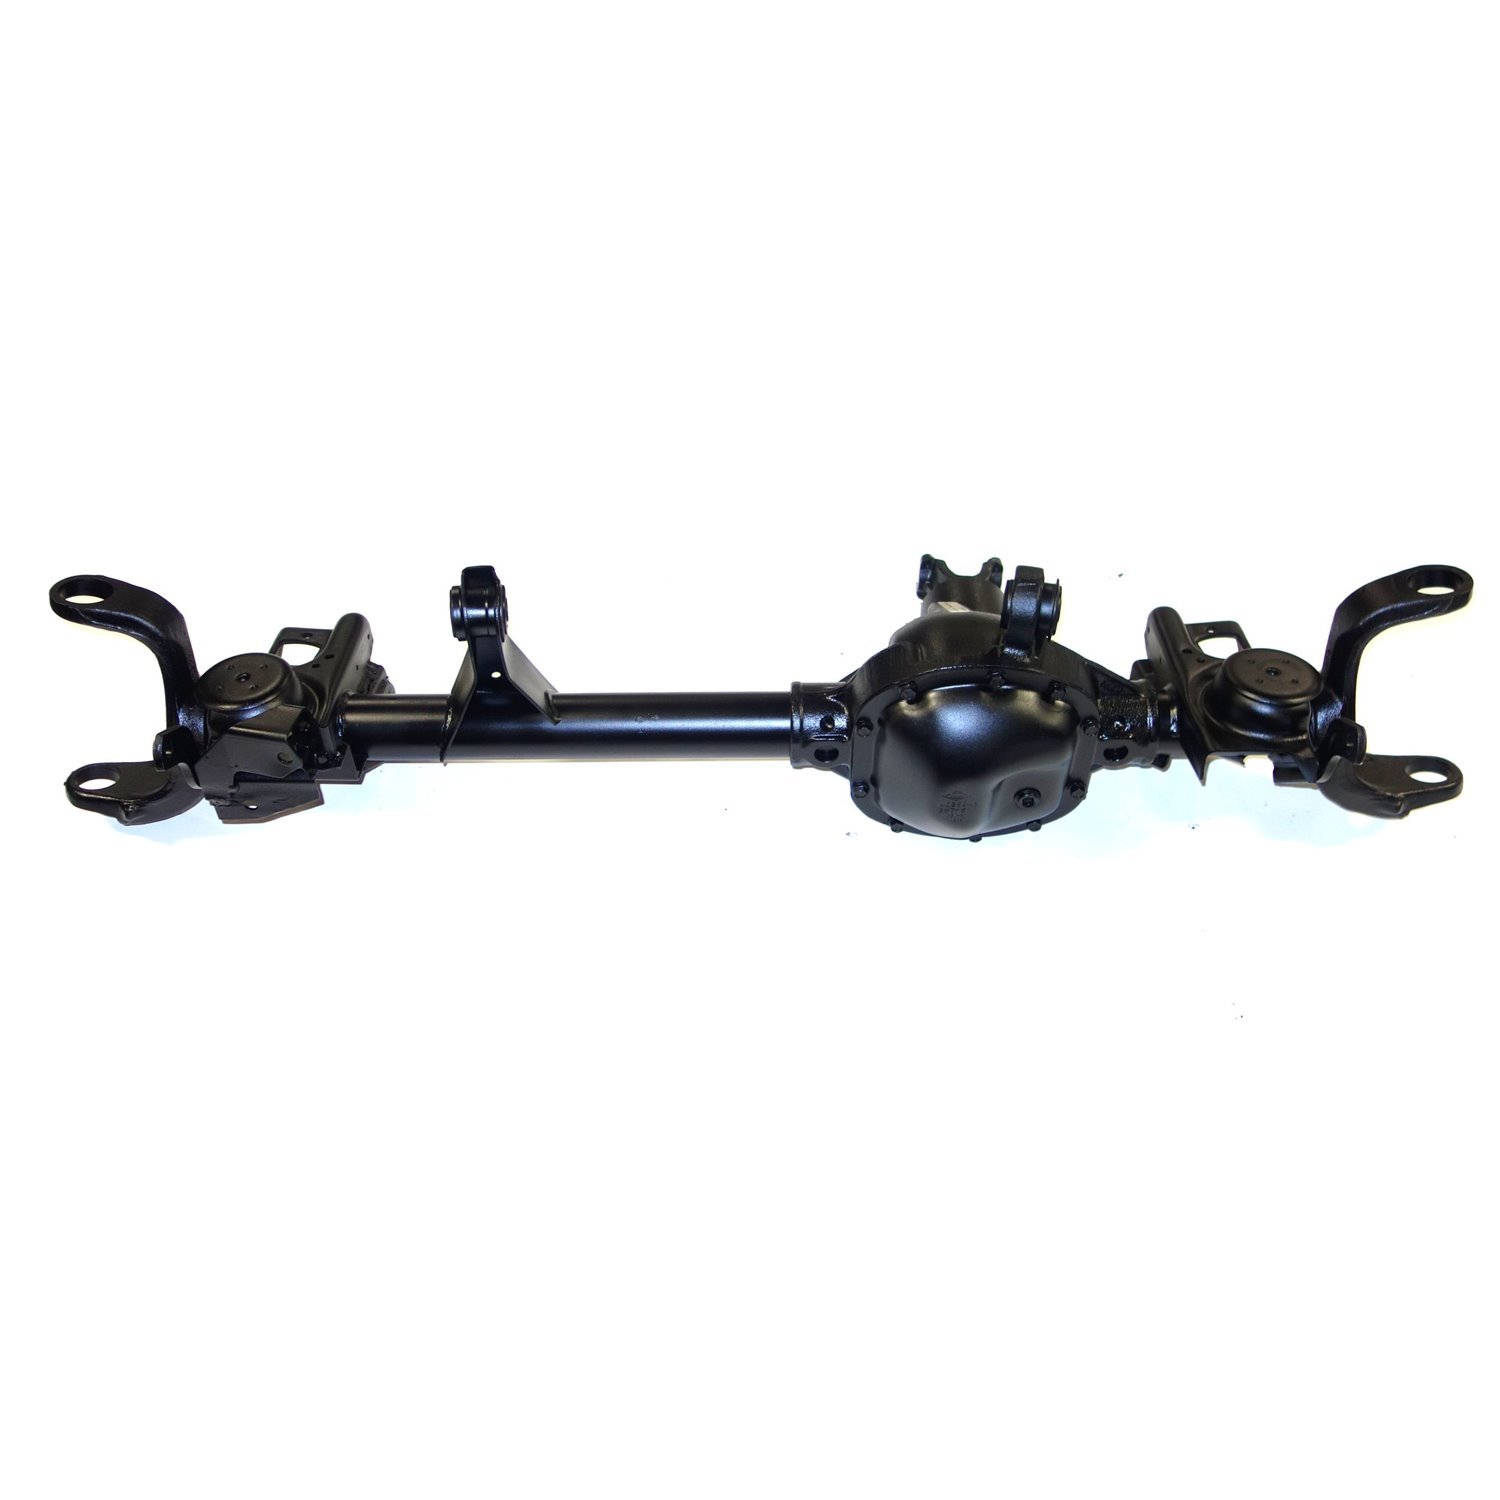 Remanufactured Complete Axle Assembly for Dana 30 94-99 Jeep Cherokee 3.07 Ratio with ABS